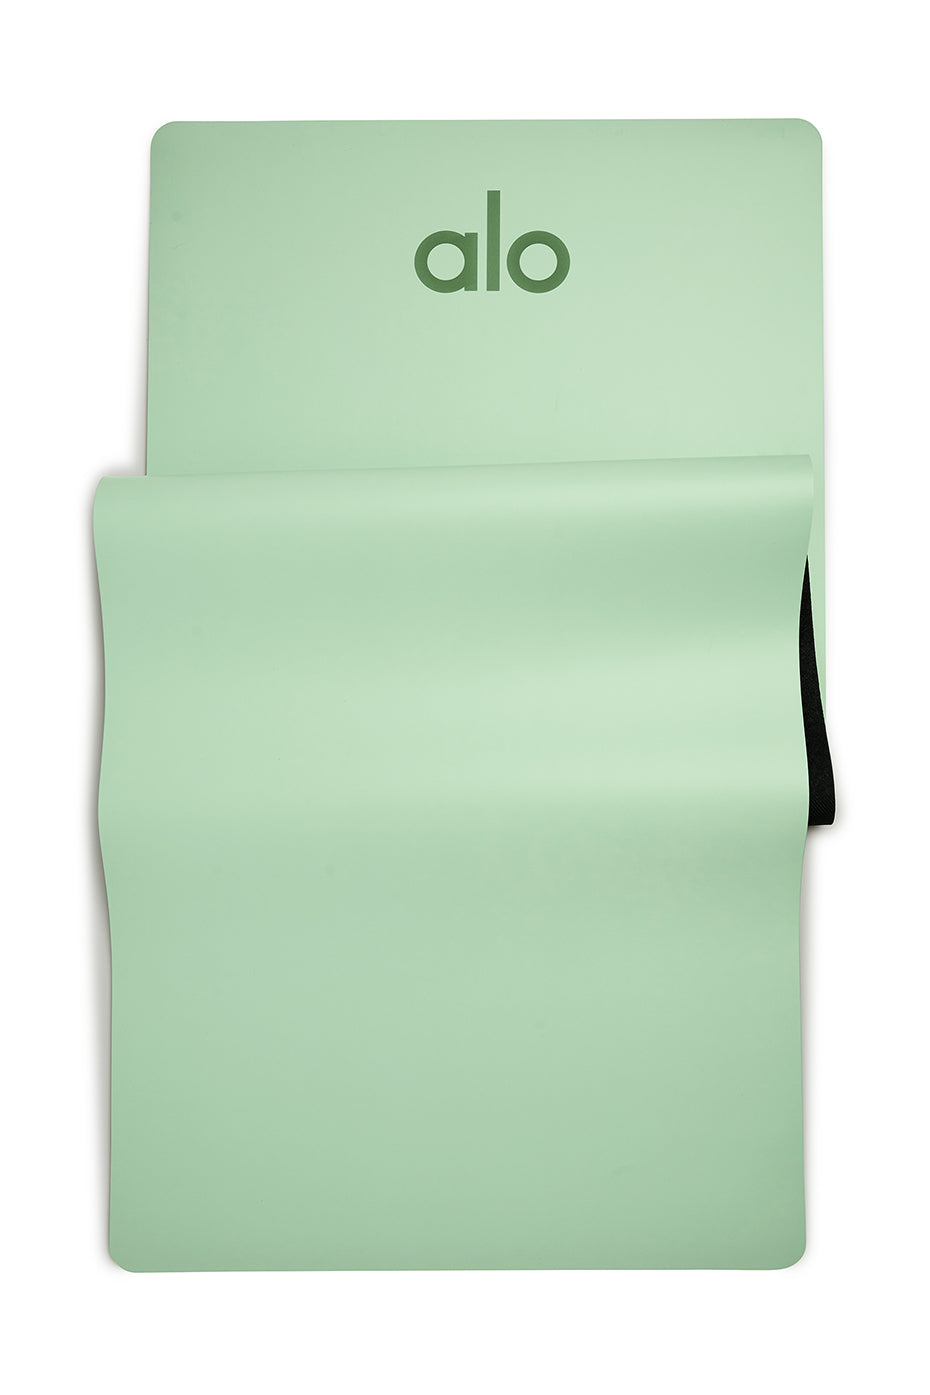 Warrior Mat in White by Alo Yoga - Work Well Daily